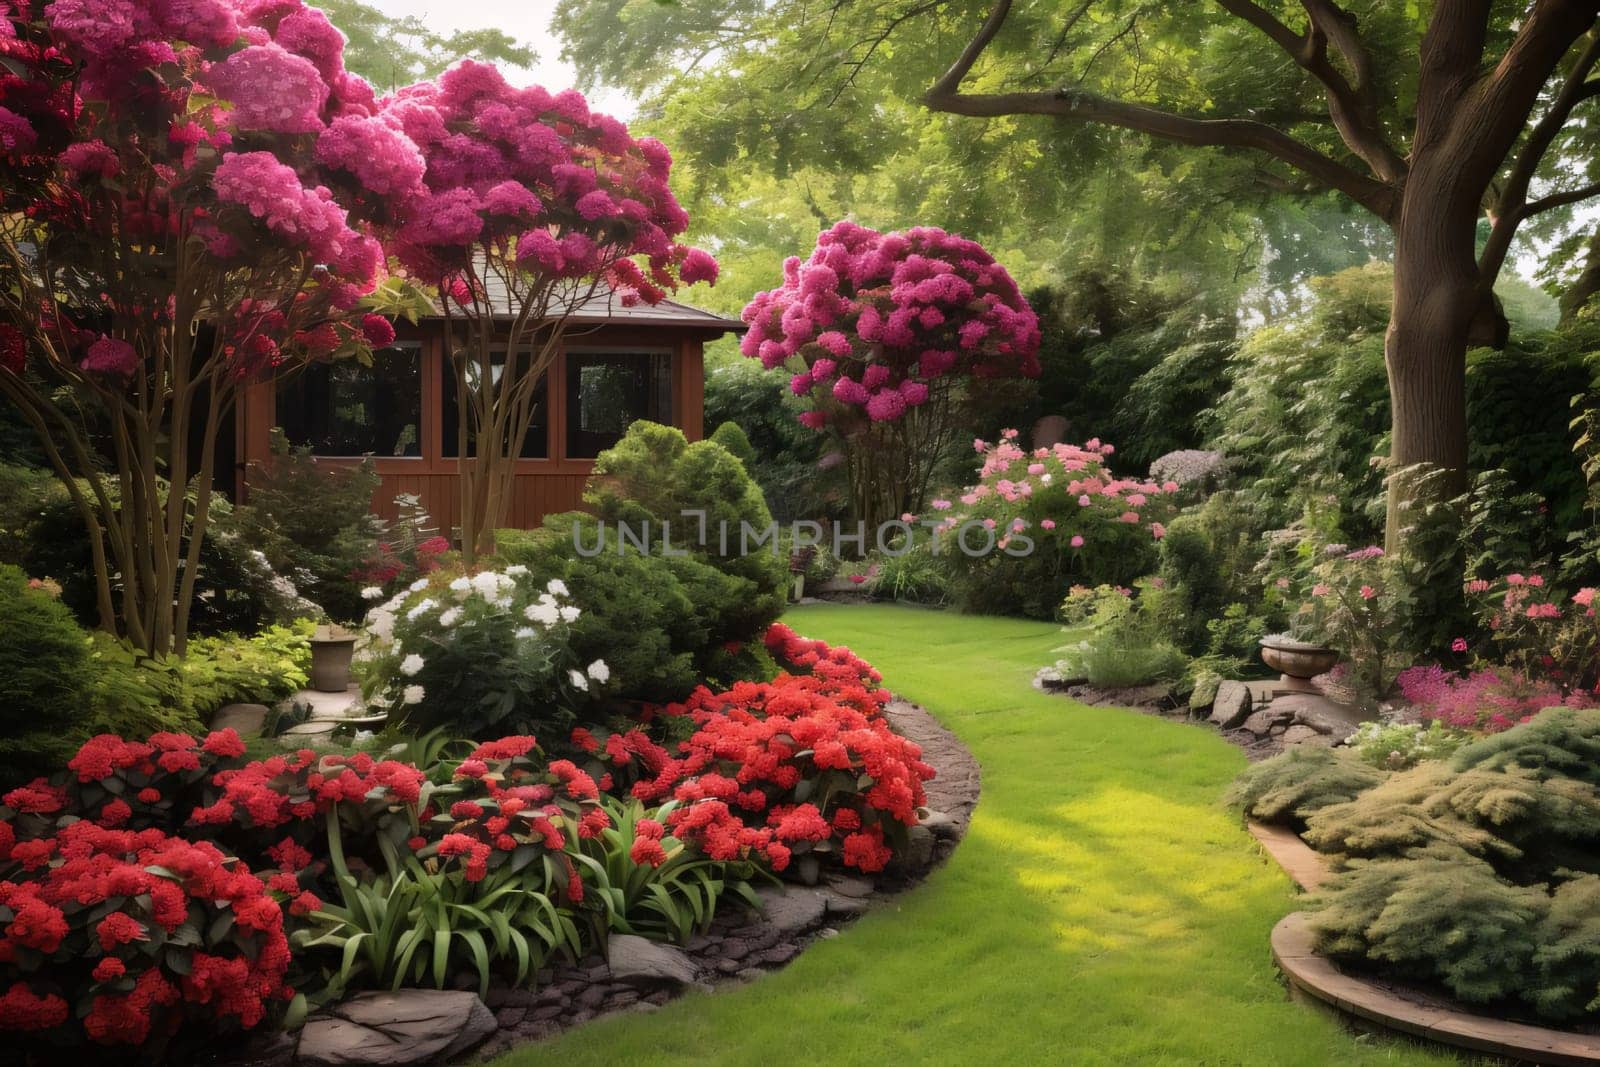 Garden full of green, pink, red flowers, Green, path, wooden cottage in the background. Flowering flowers, a symbol of spring, new life. A joyful time of nature awakening to life.